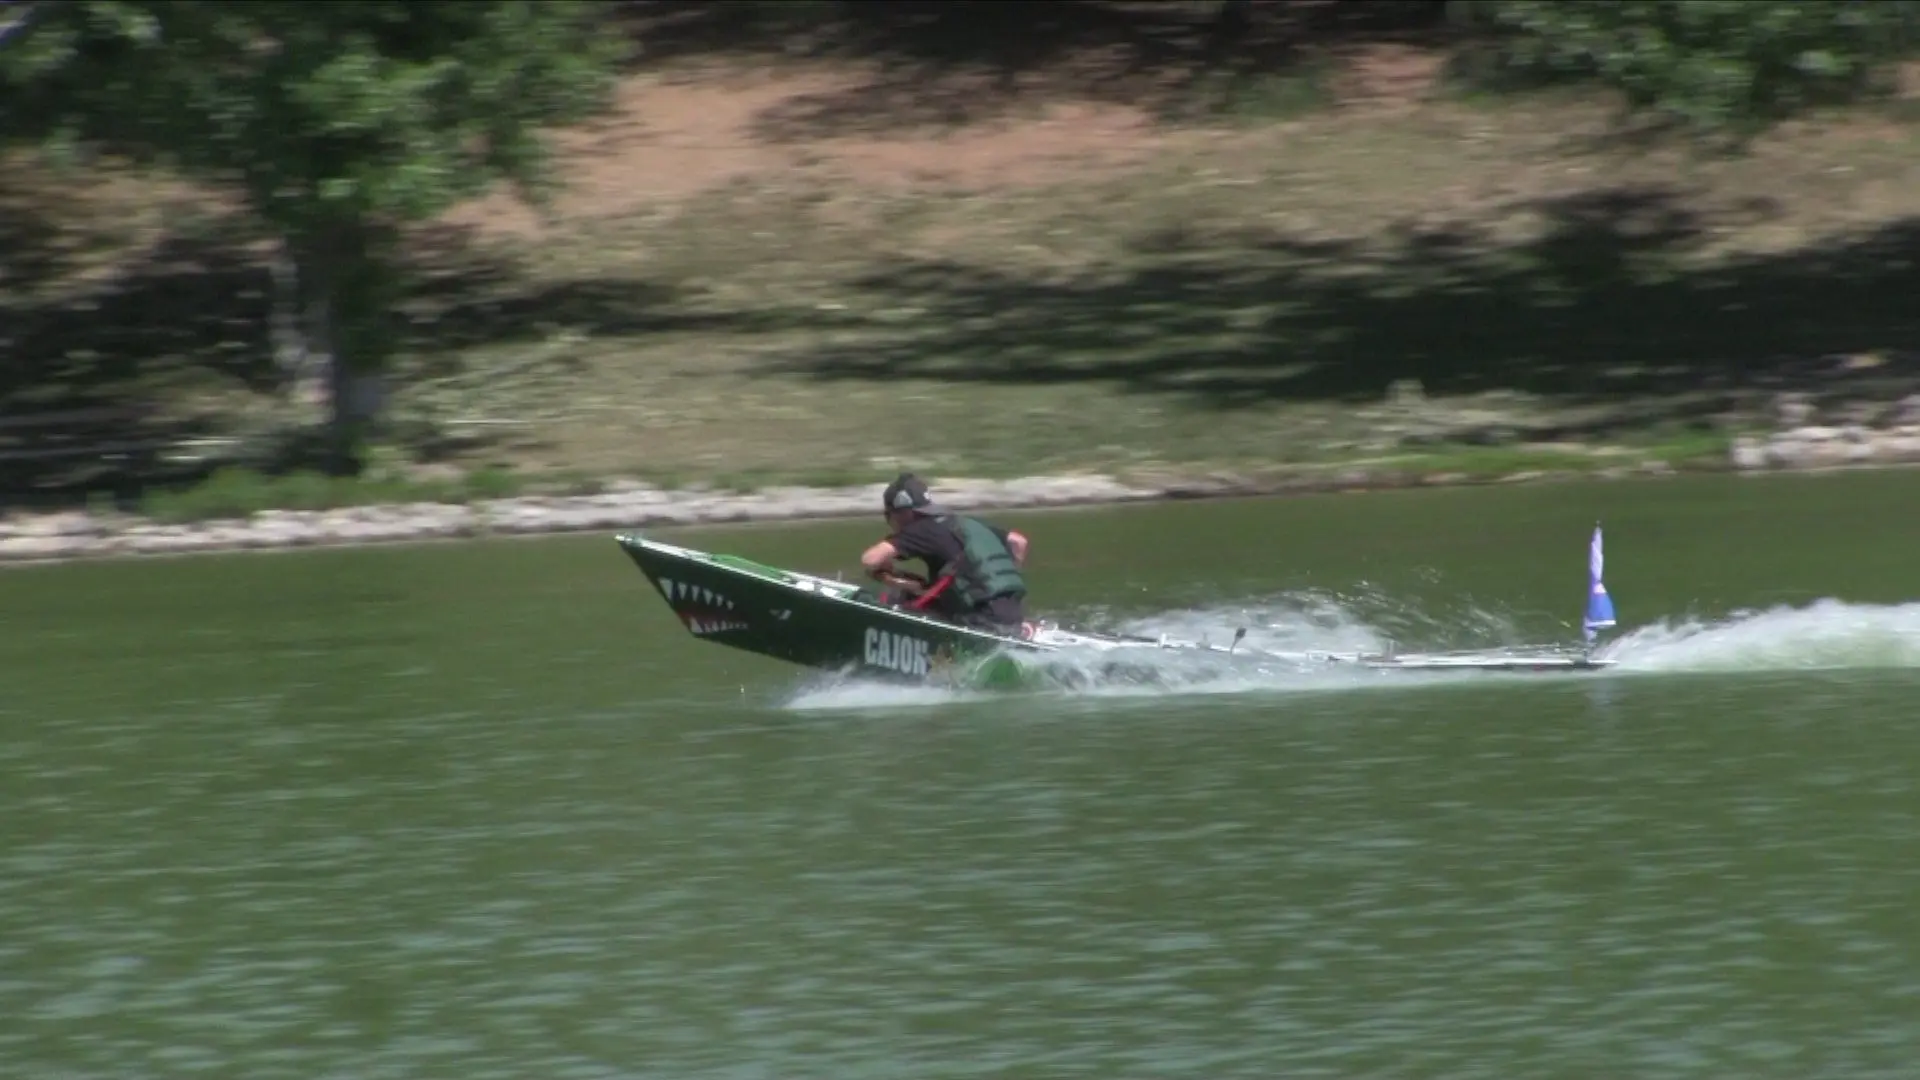 A racer flies through the water in a student-built speed boat.